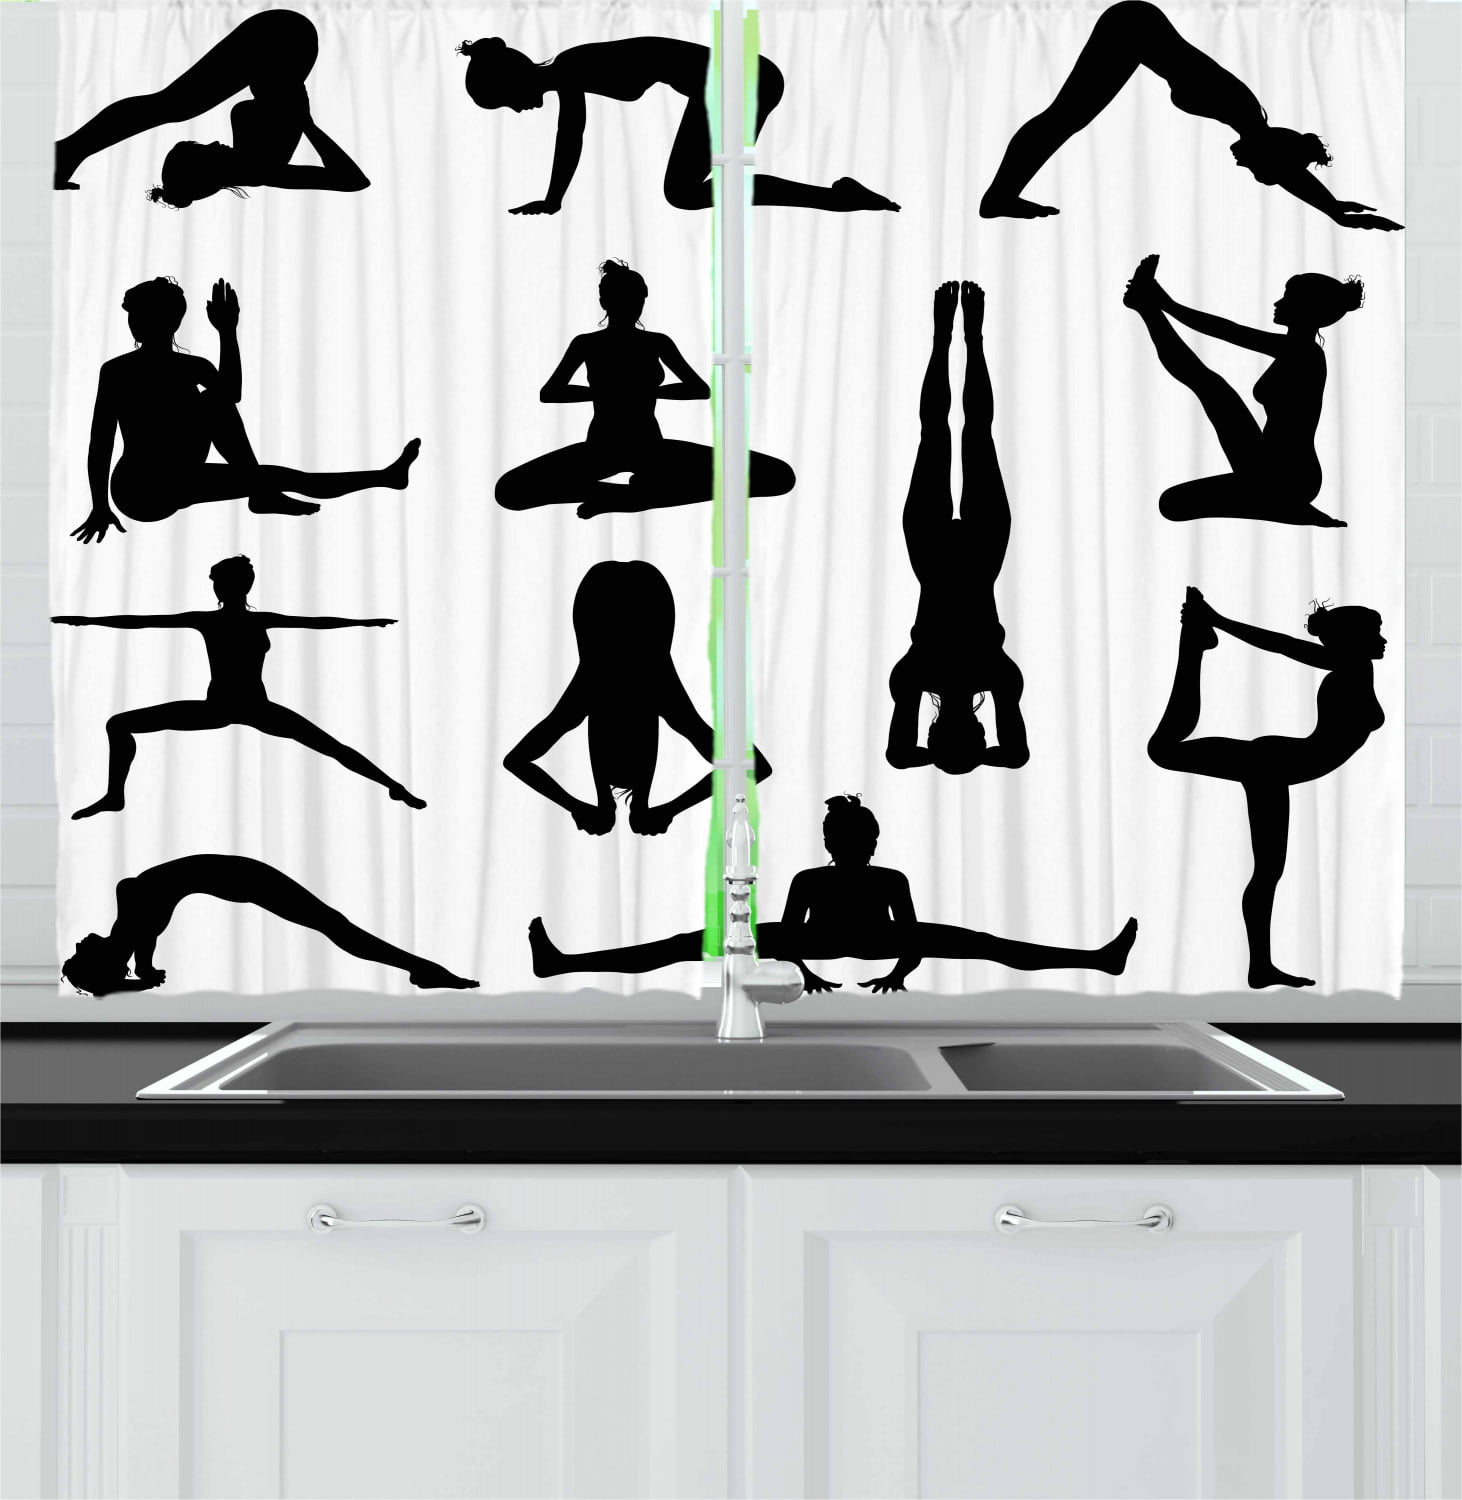 Yoga Curtains 2 Panels Set Various Yoga And Pilates Pose Silhouettes Asanas Prayanama Form Position Wellness Window Drapes For Living Room Bedroom 55w X 39l Inches Black White By Ambesonne Walmart Com